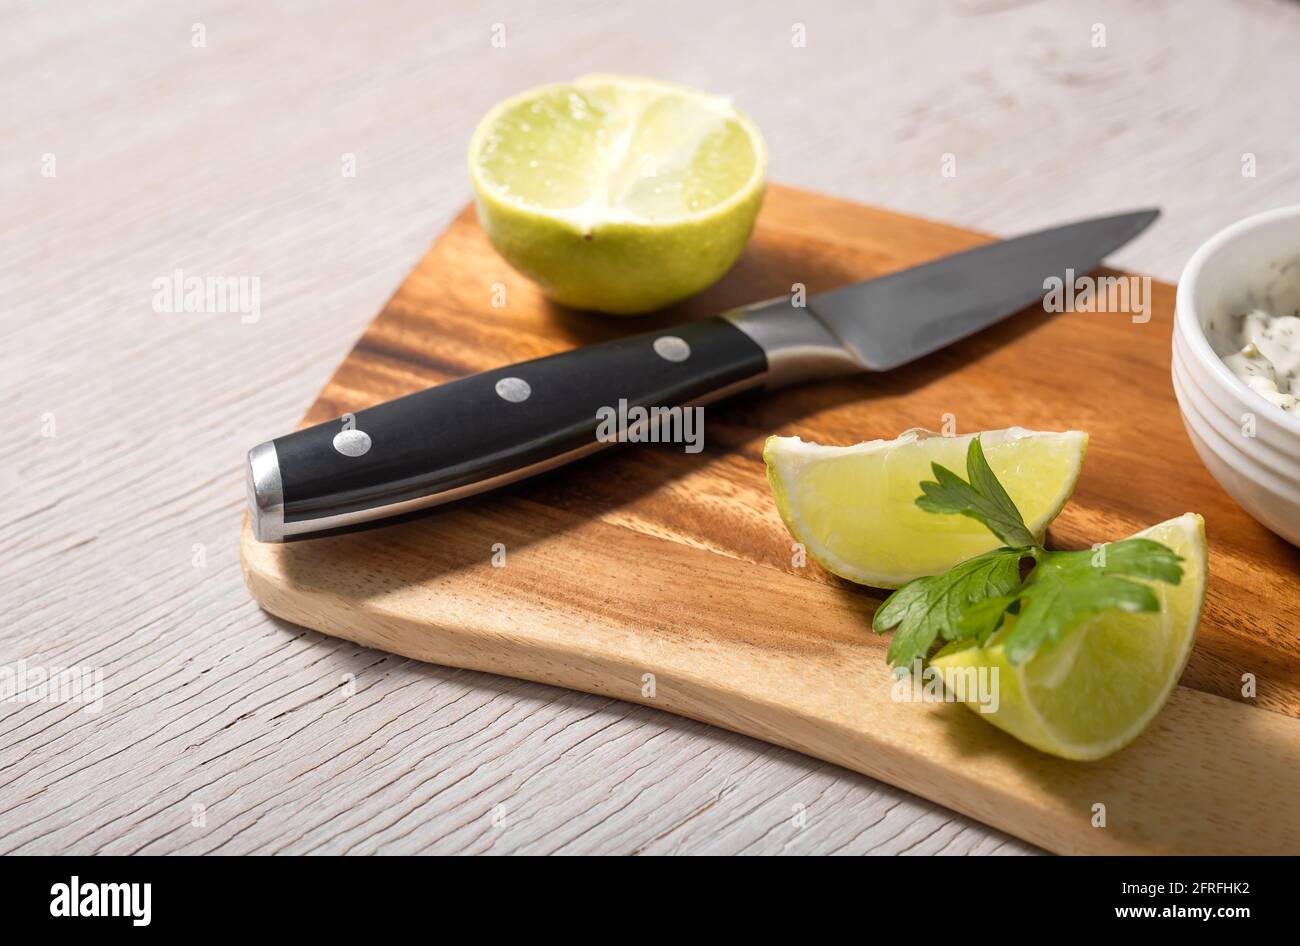 Sliced lime and black knife on wooden cutting board Stock Photo